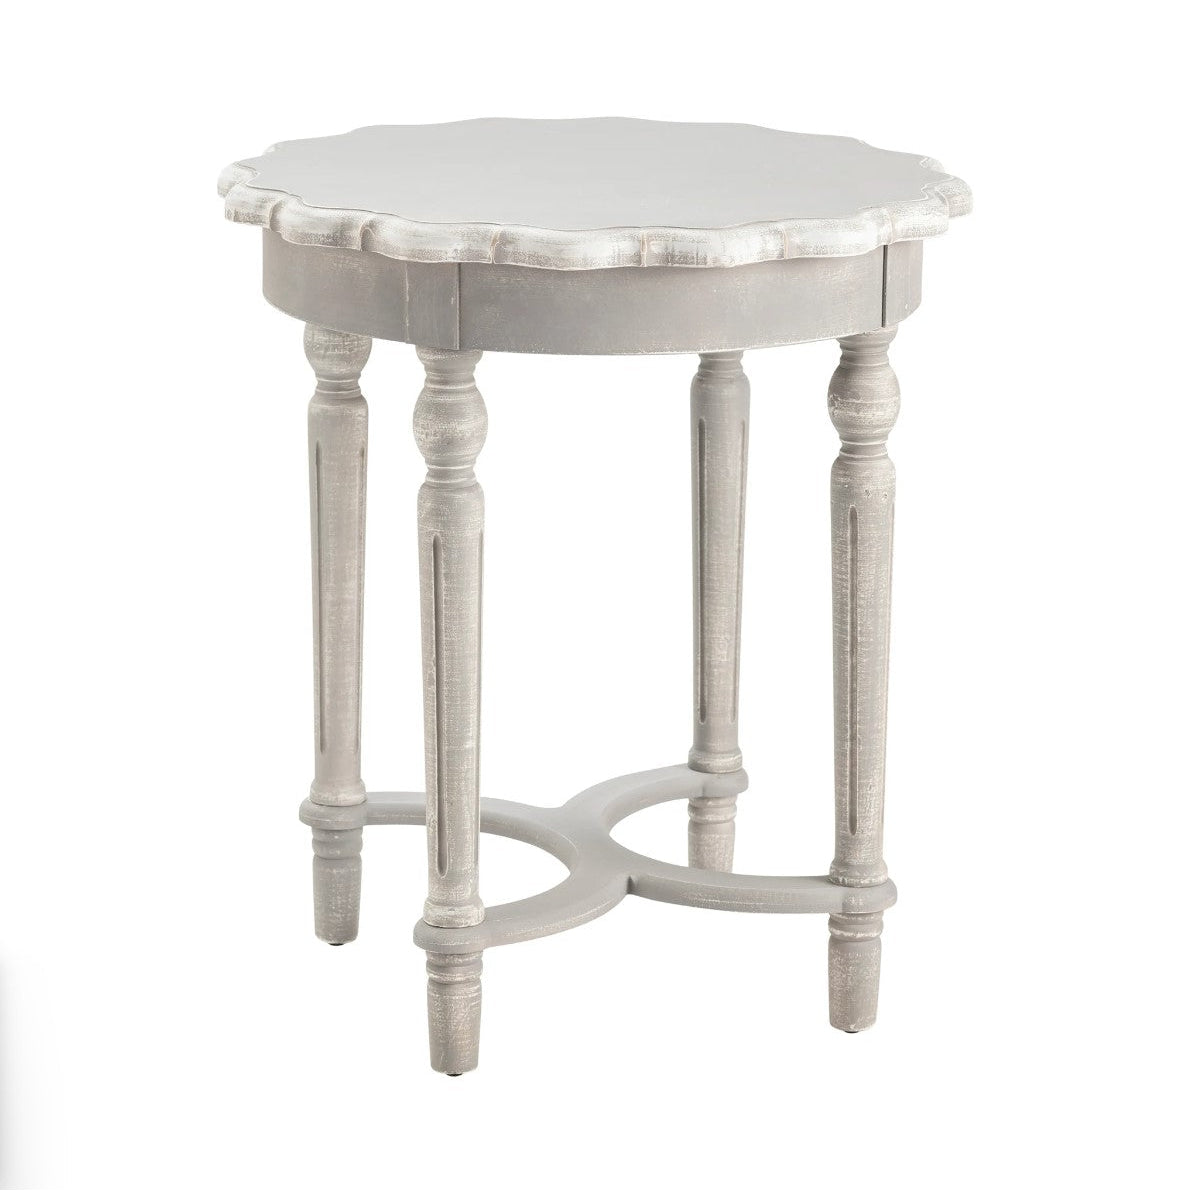 Crestview Collection Pembroke 24" x 24" x 27" Occasional Wood Turned Leg Scalloped Accent Table In Chalk Gray Finish